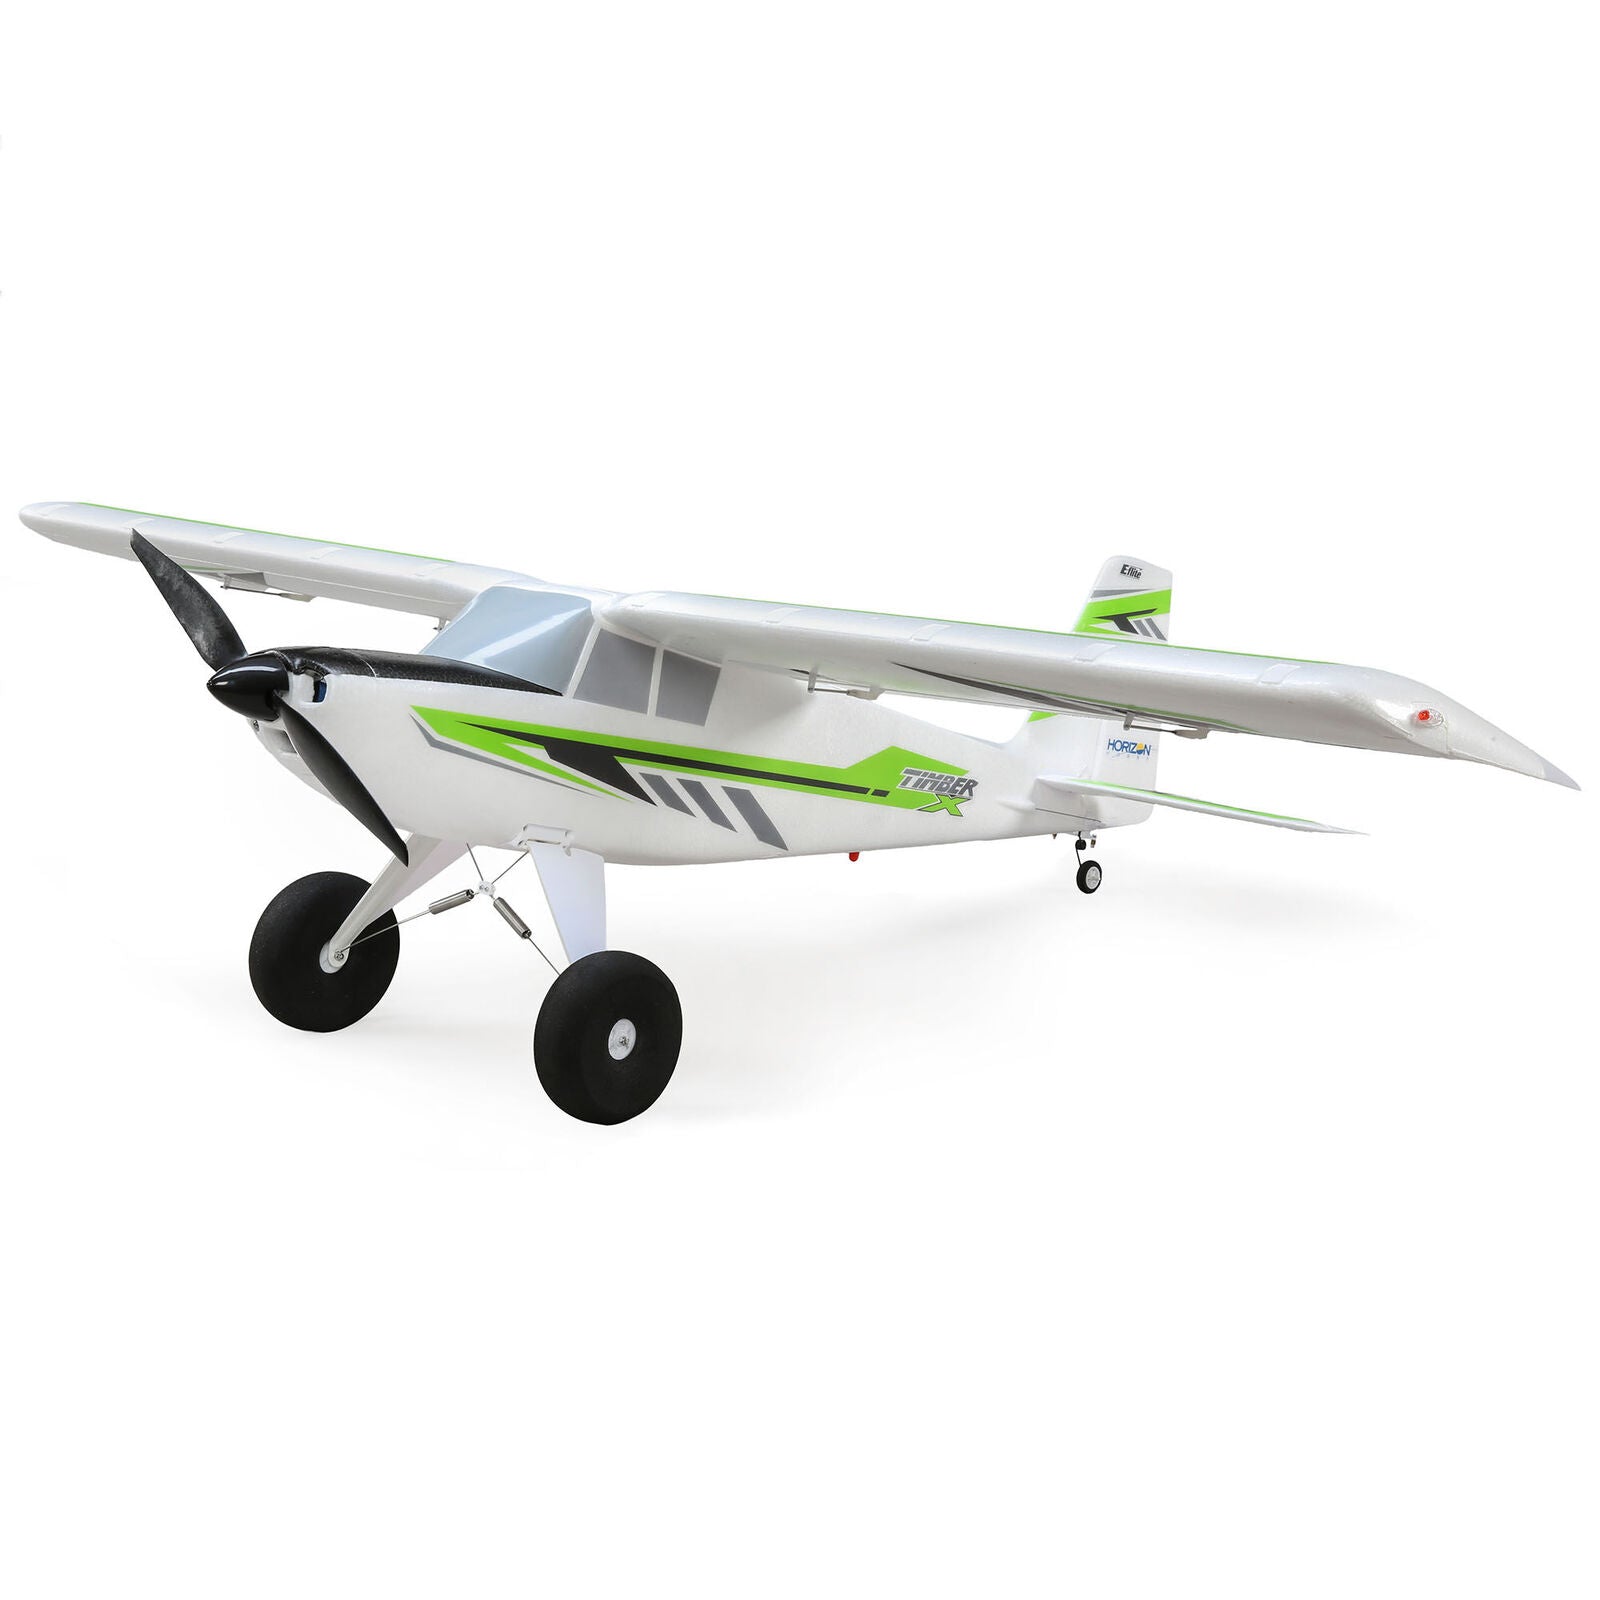 EFLITE EFL38500 Timber X 1.2m BNF Basic with AS3X and SAFE Select